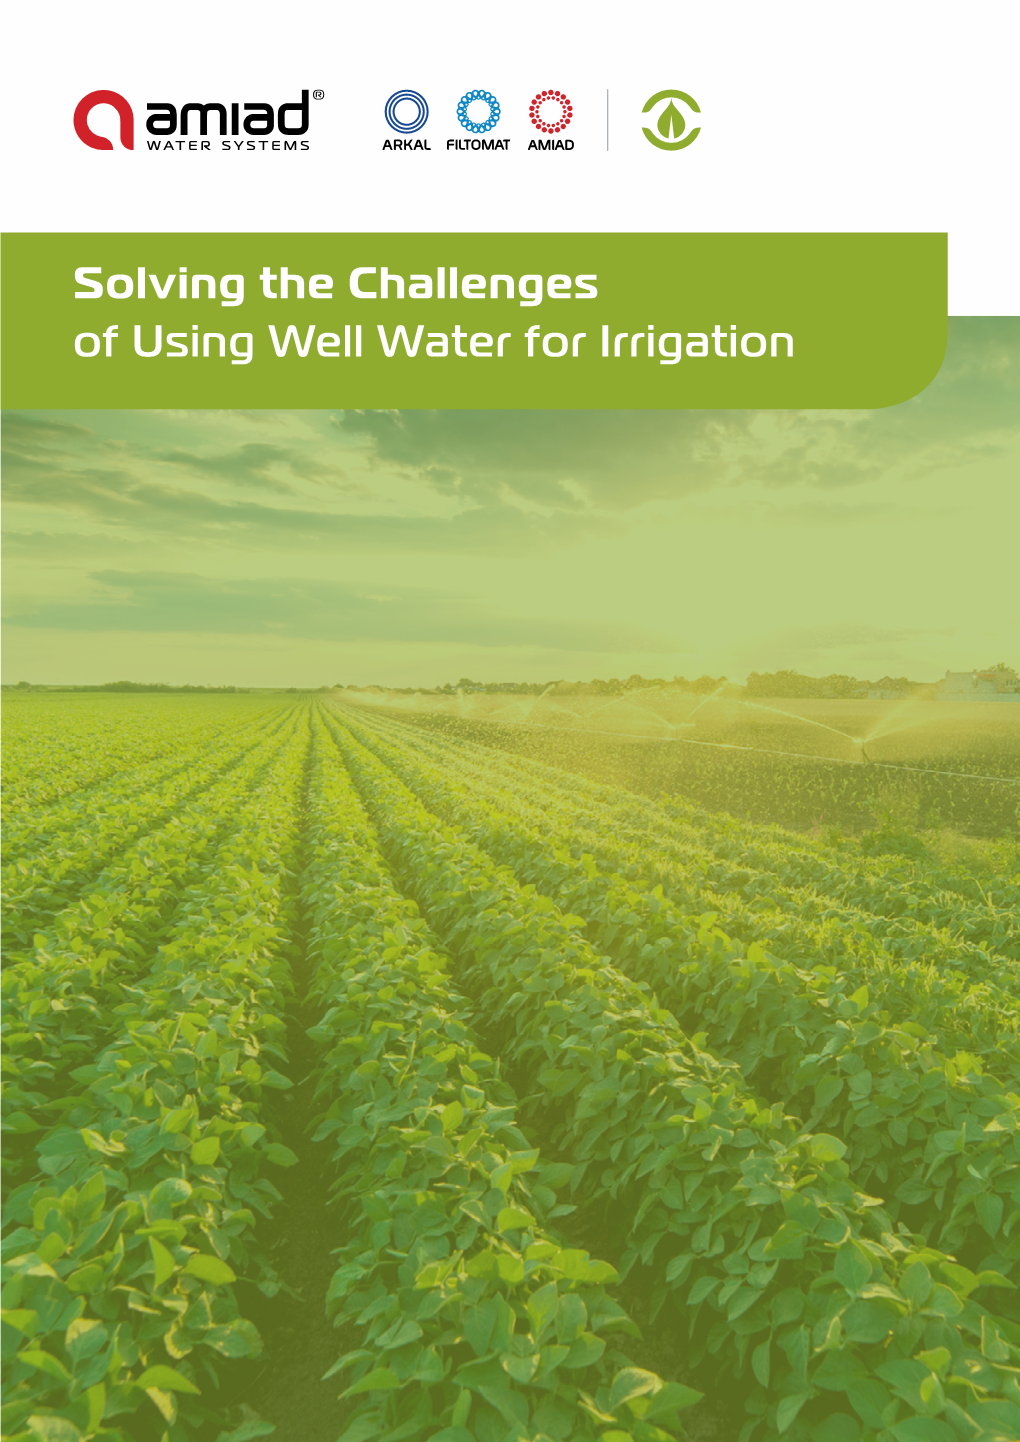 Solving the Challenges of Using Well Water for Irrigation